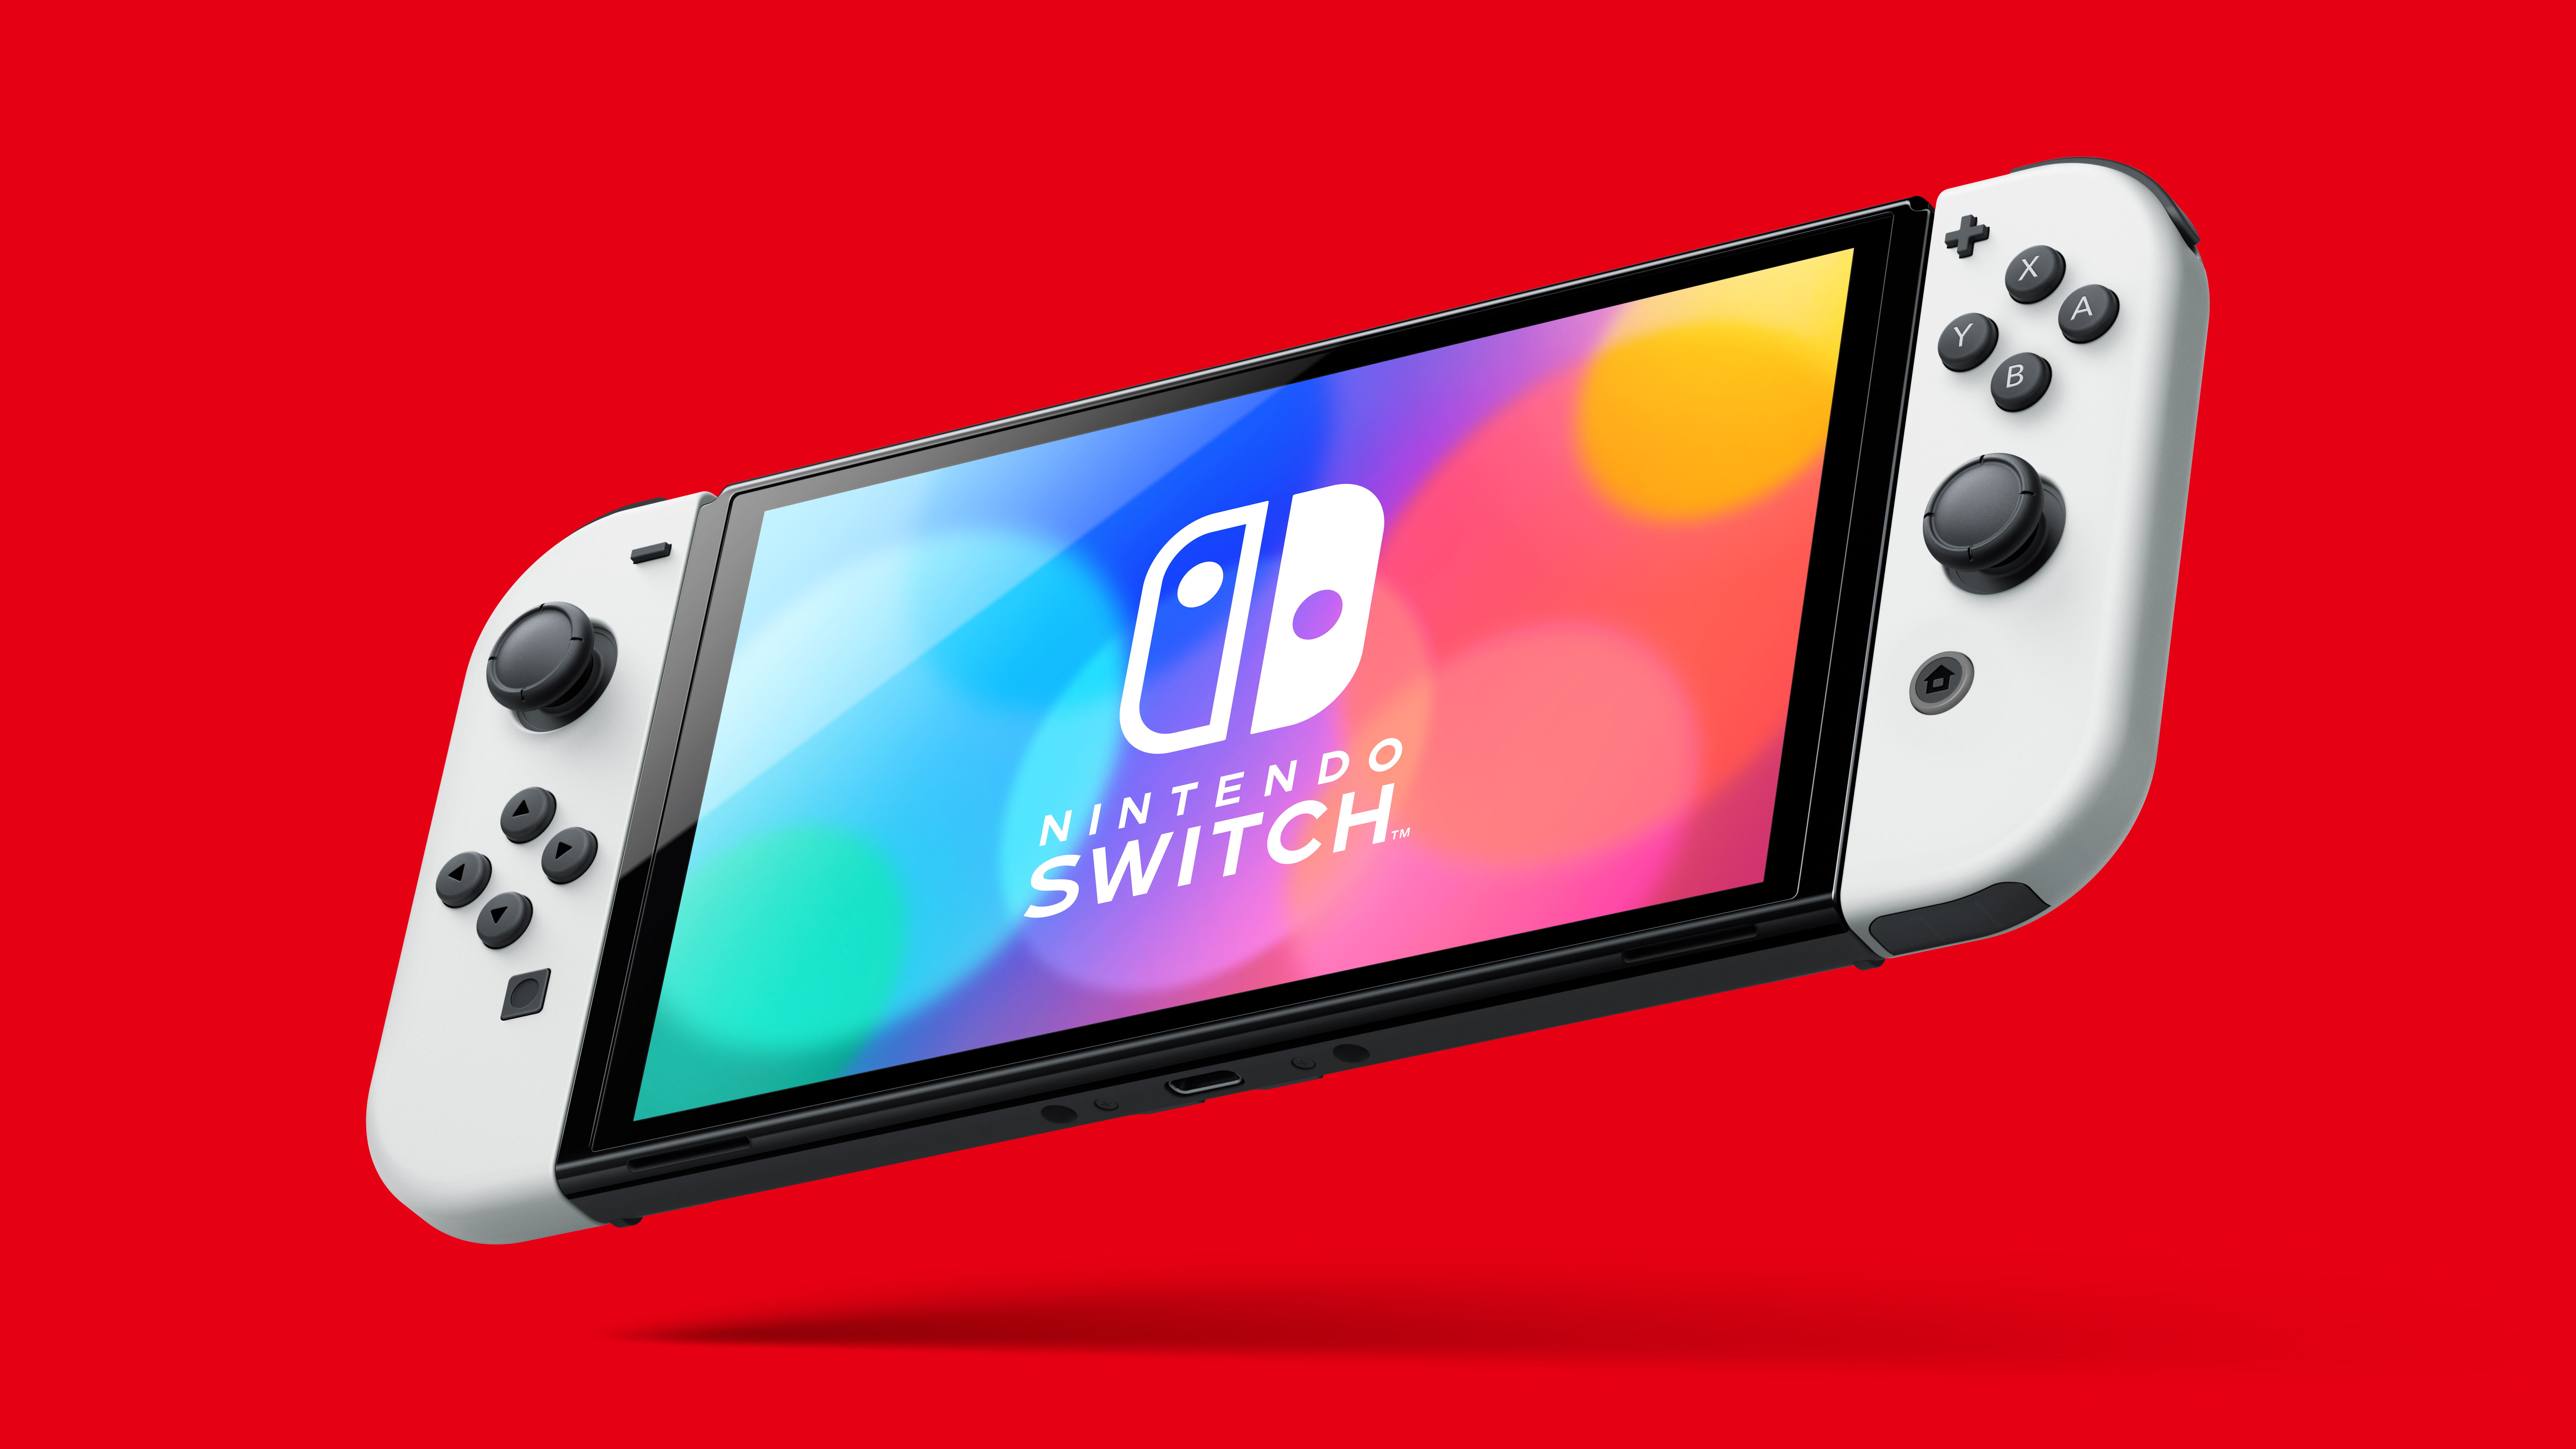 Nintendo Switch OLED Sold Out Immediately, Video Game Twitter Reacts